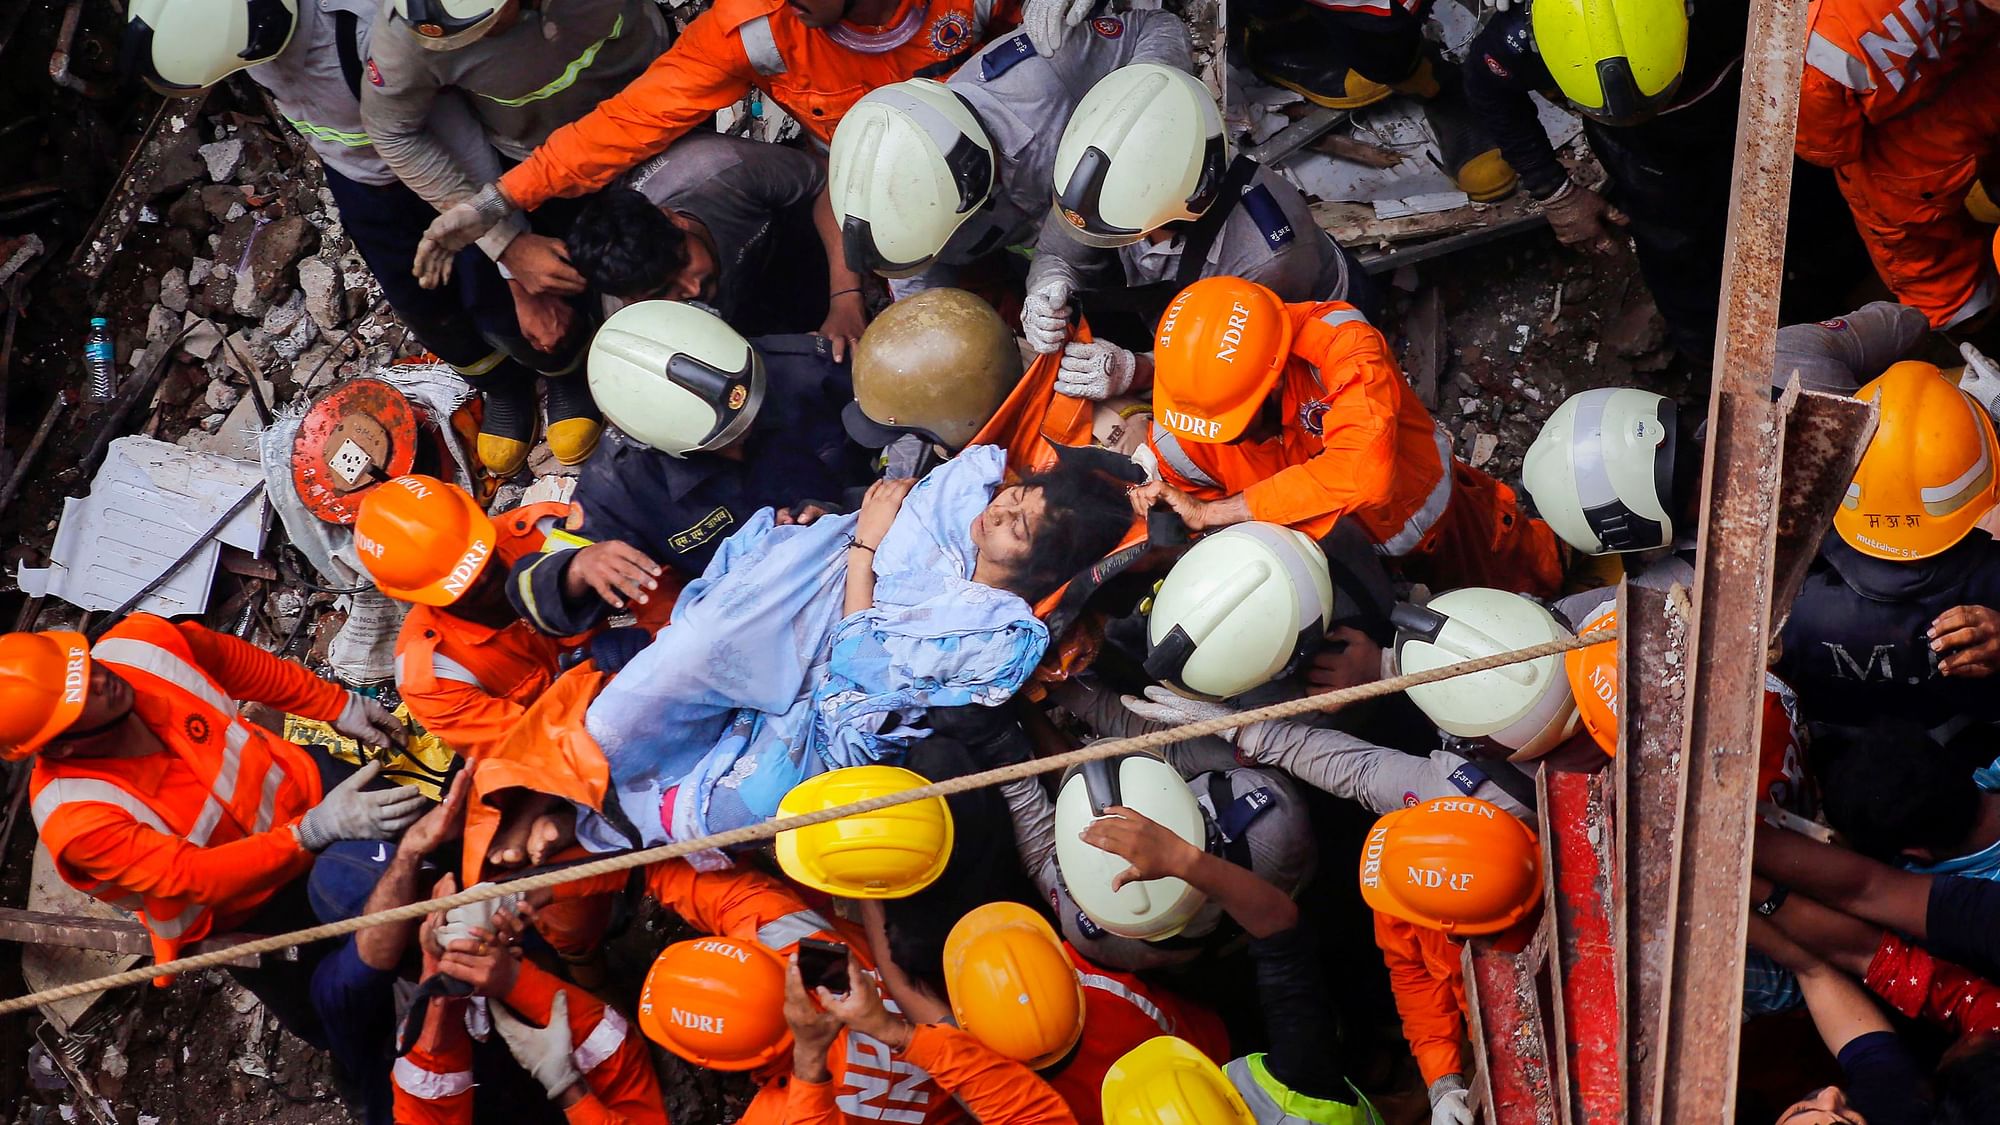 Catch all the live updates of the Dongri building collapse in Mumbai here.